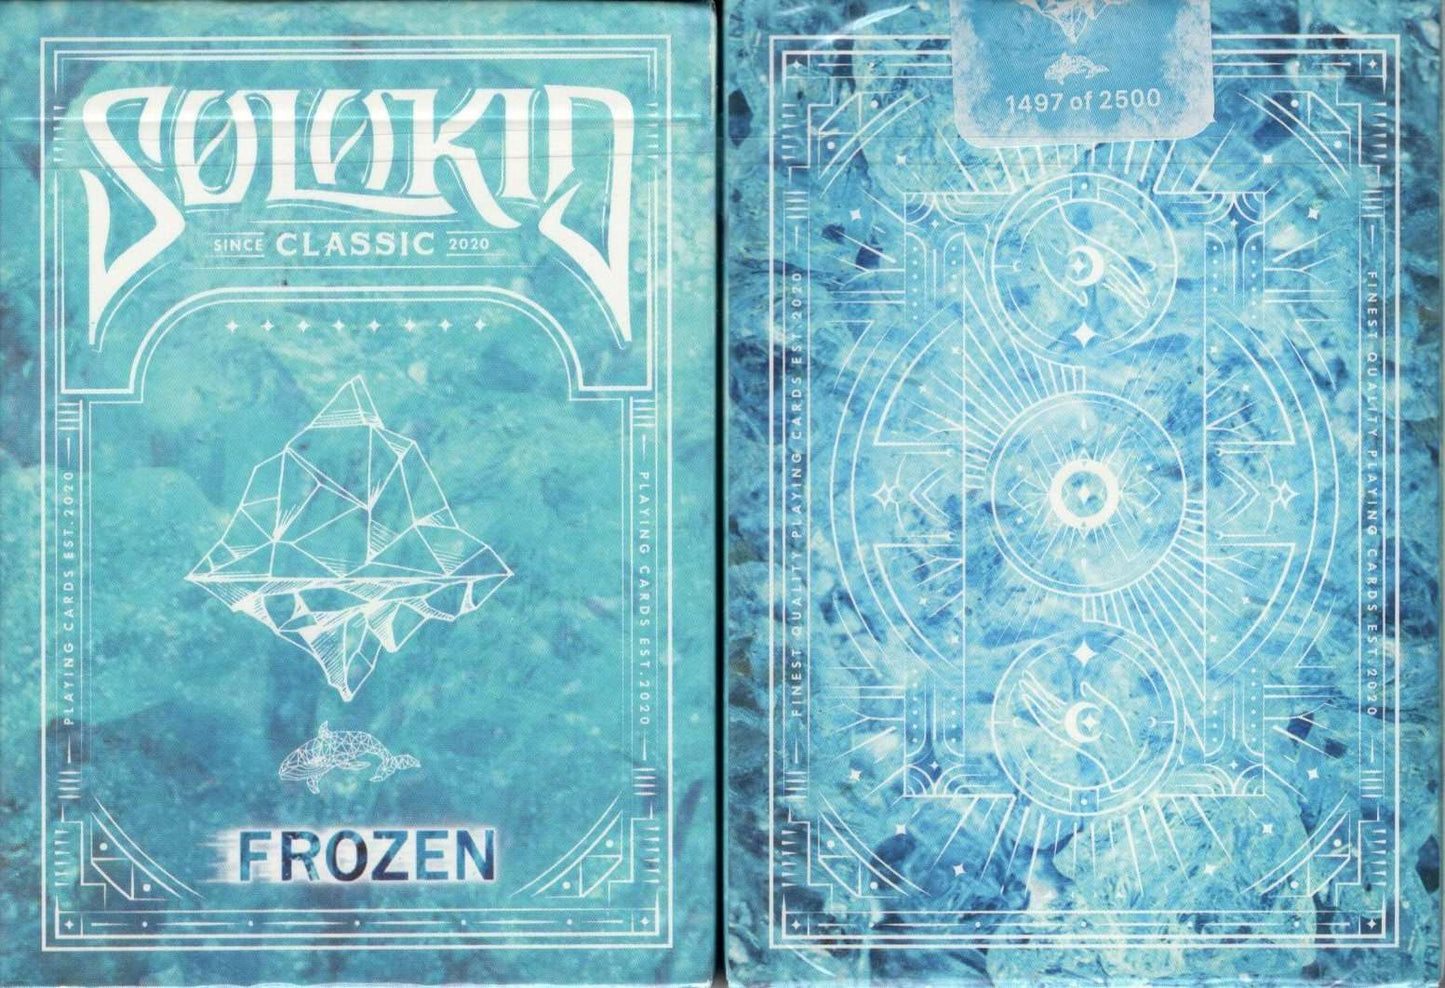 PlayingCardDecks.com-Solokid Frozen Playing Cards MPC